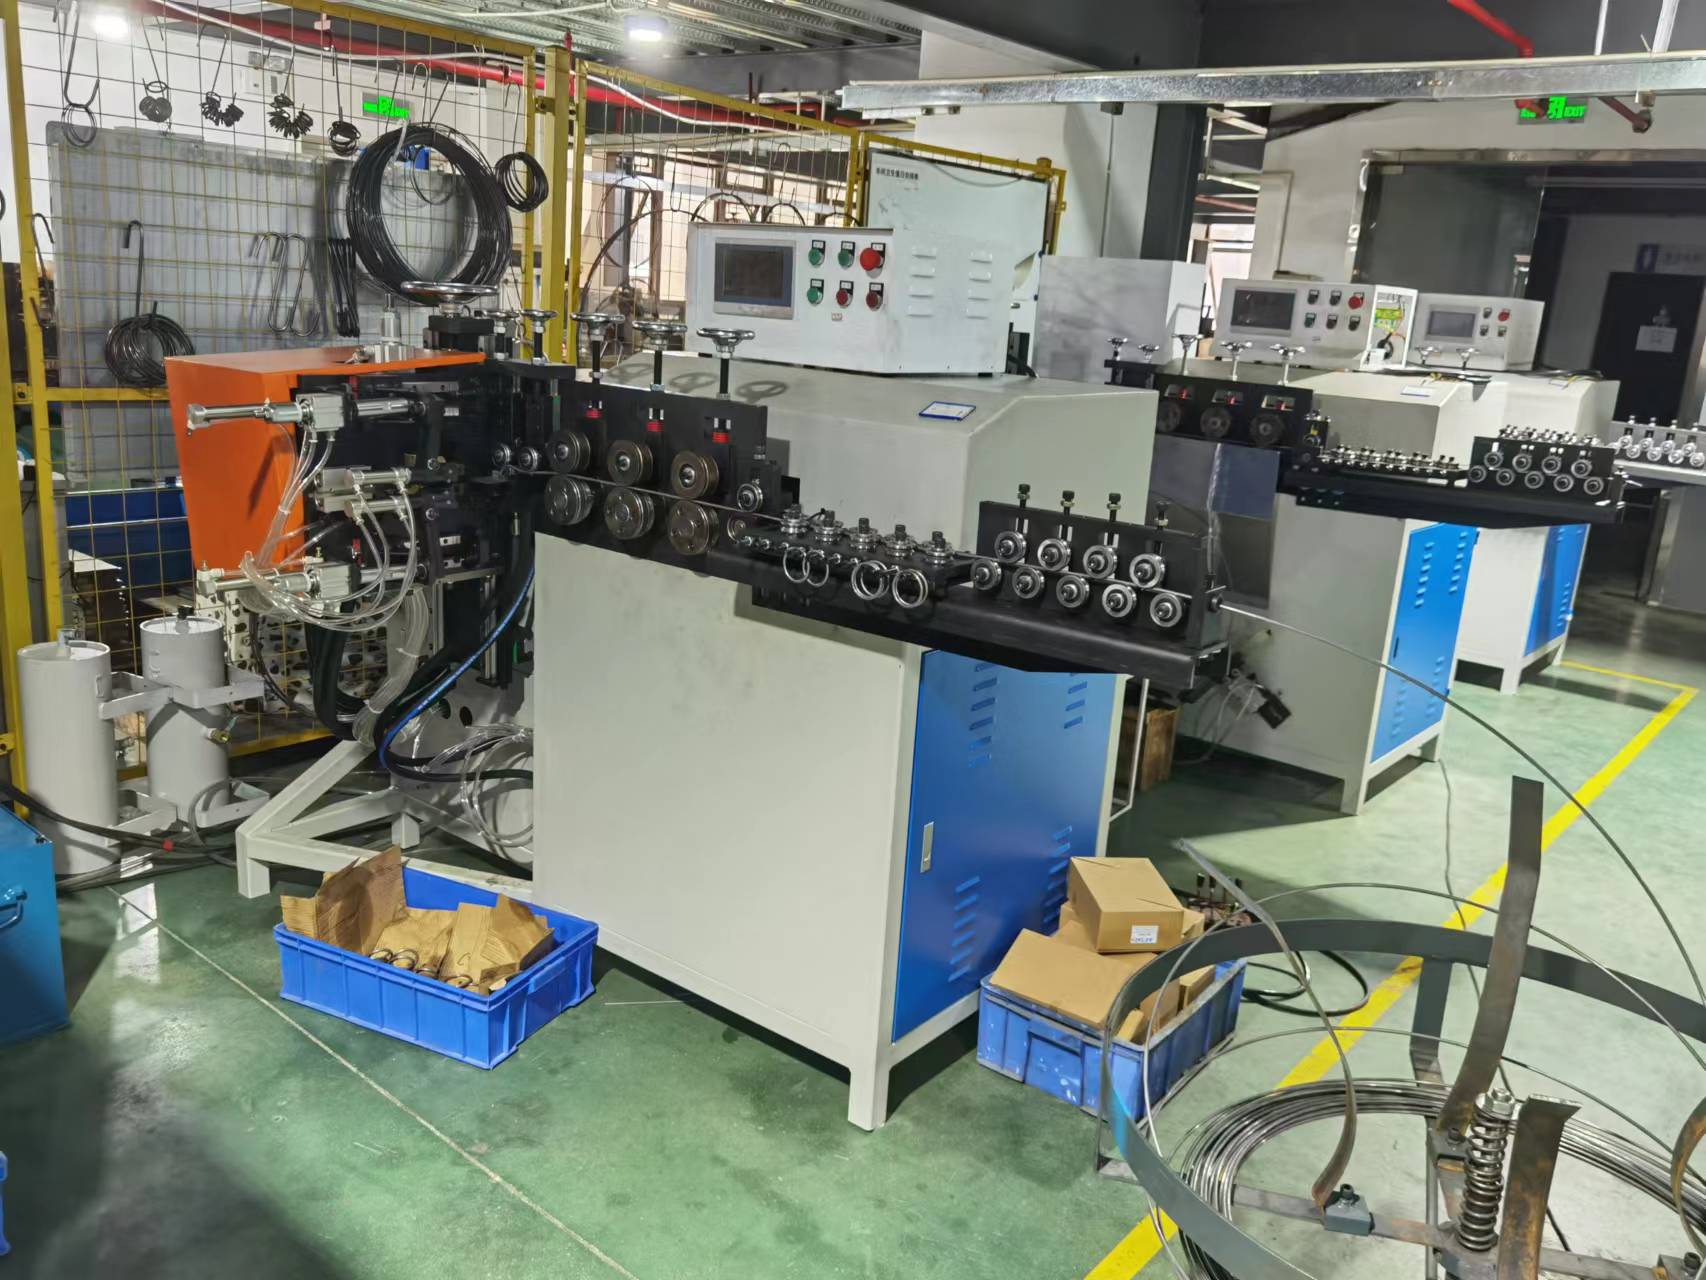 Automatic wire ring making machine-6mm wire, inner ring diameter 52.5mm BR034